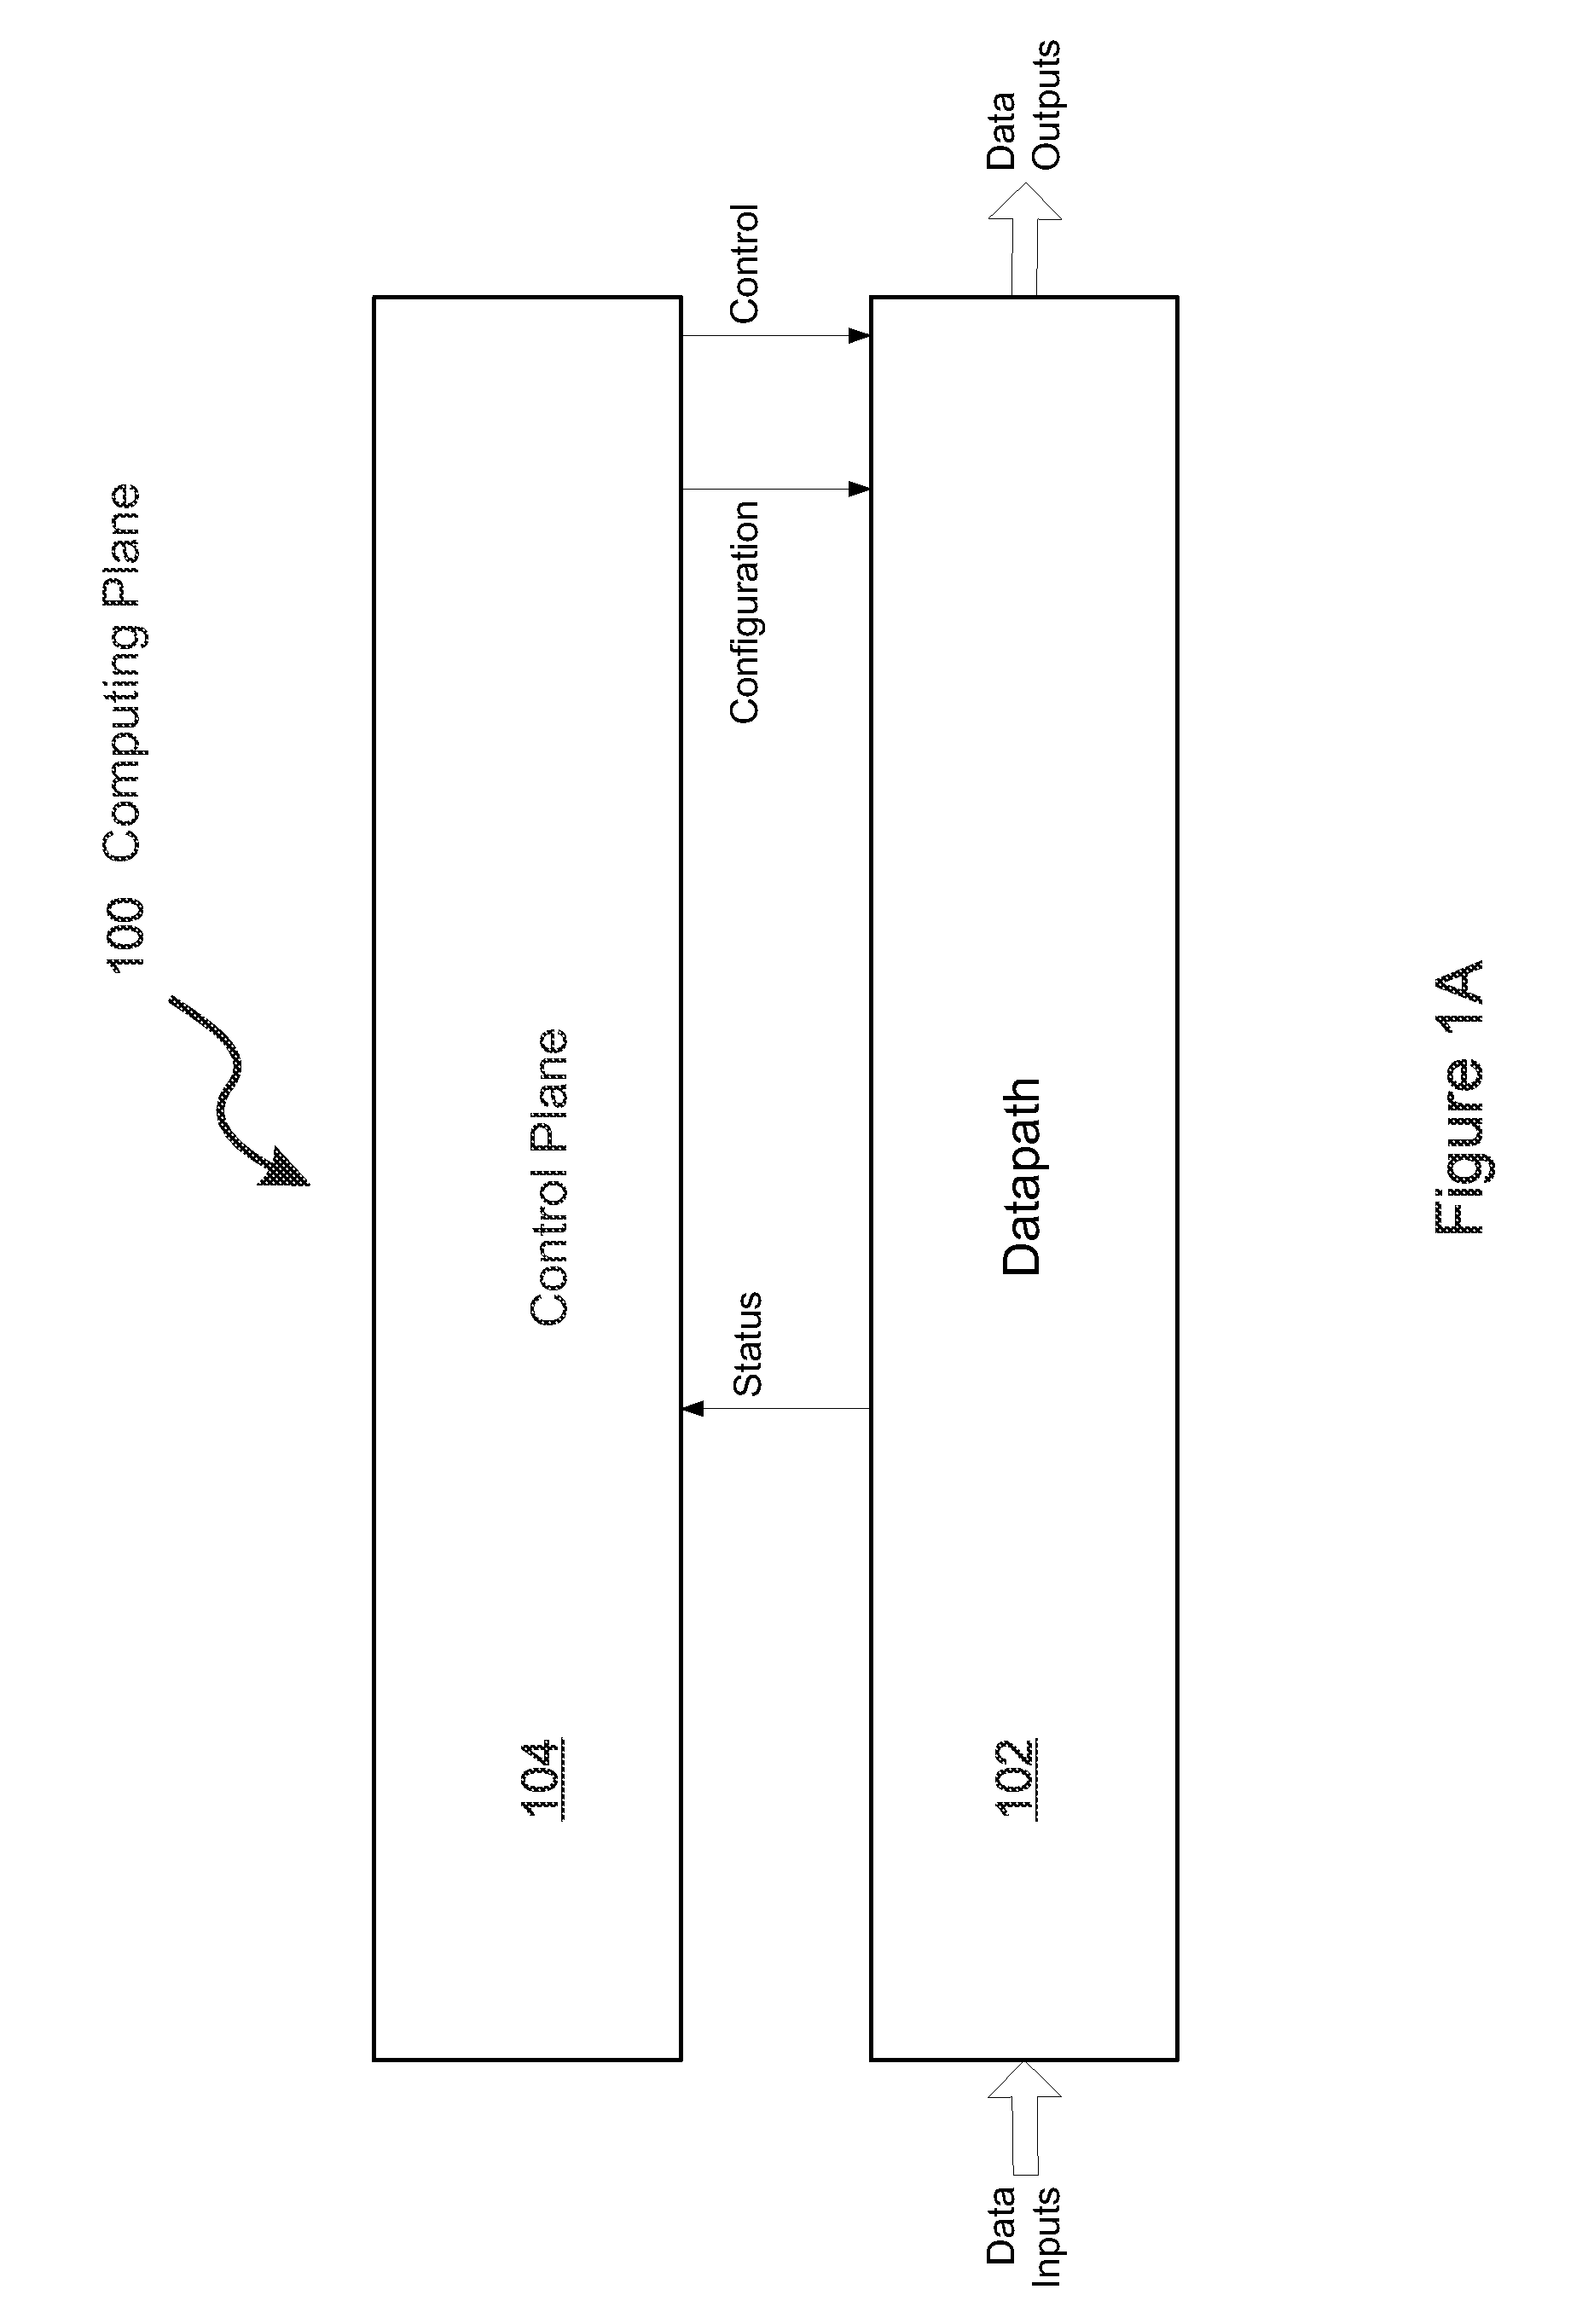 Hierarchical multi-core processor and method of programming for efficient data processing